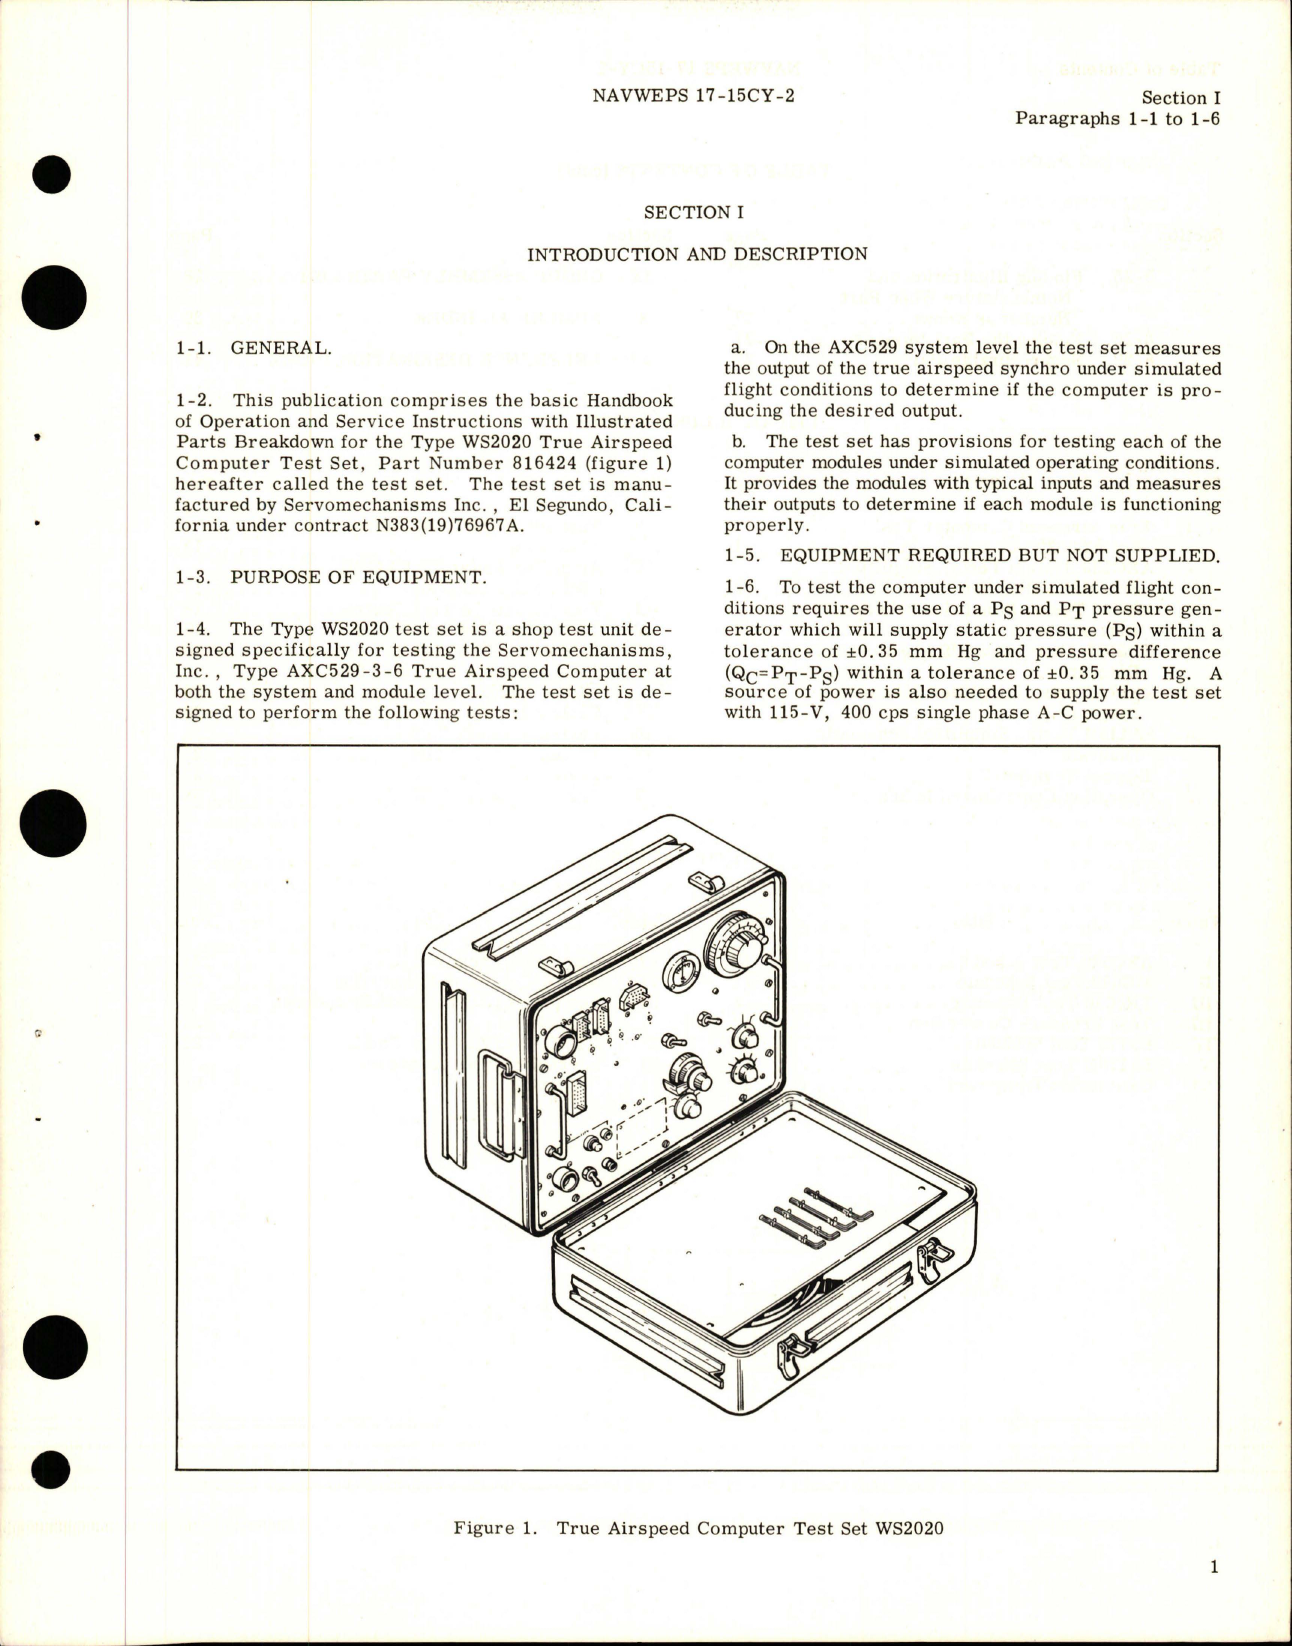 Sample page 5 from AirCorps Library document: Operation & Service Instructions with Illustrated Parts for True Airspeed Computer Test Set - Type WS2020 - Part 816424